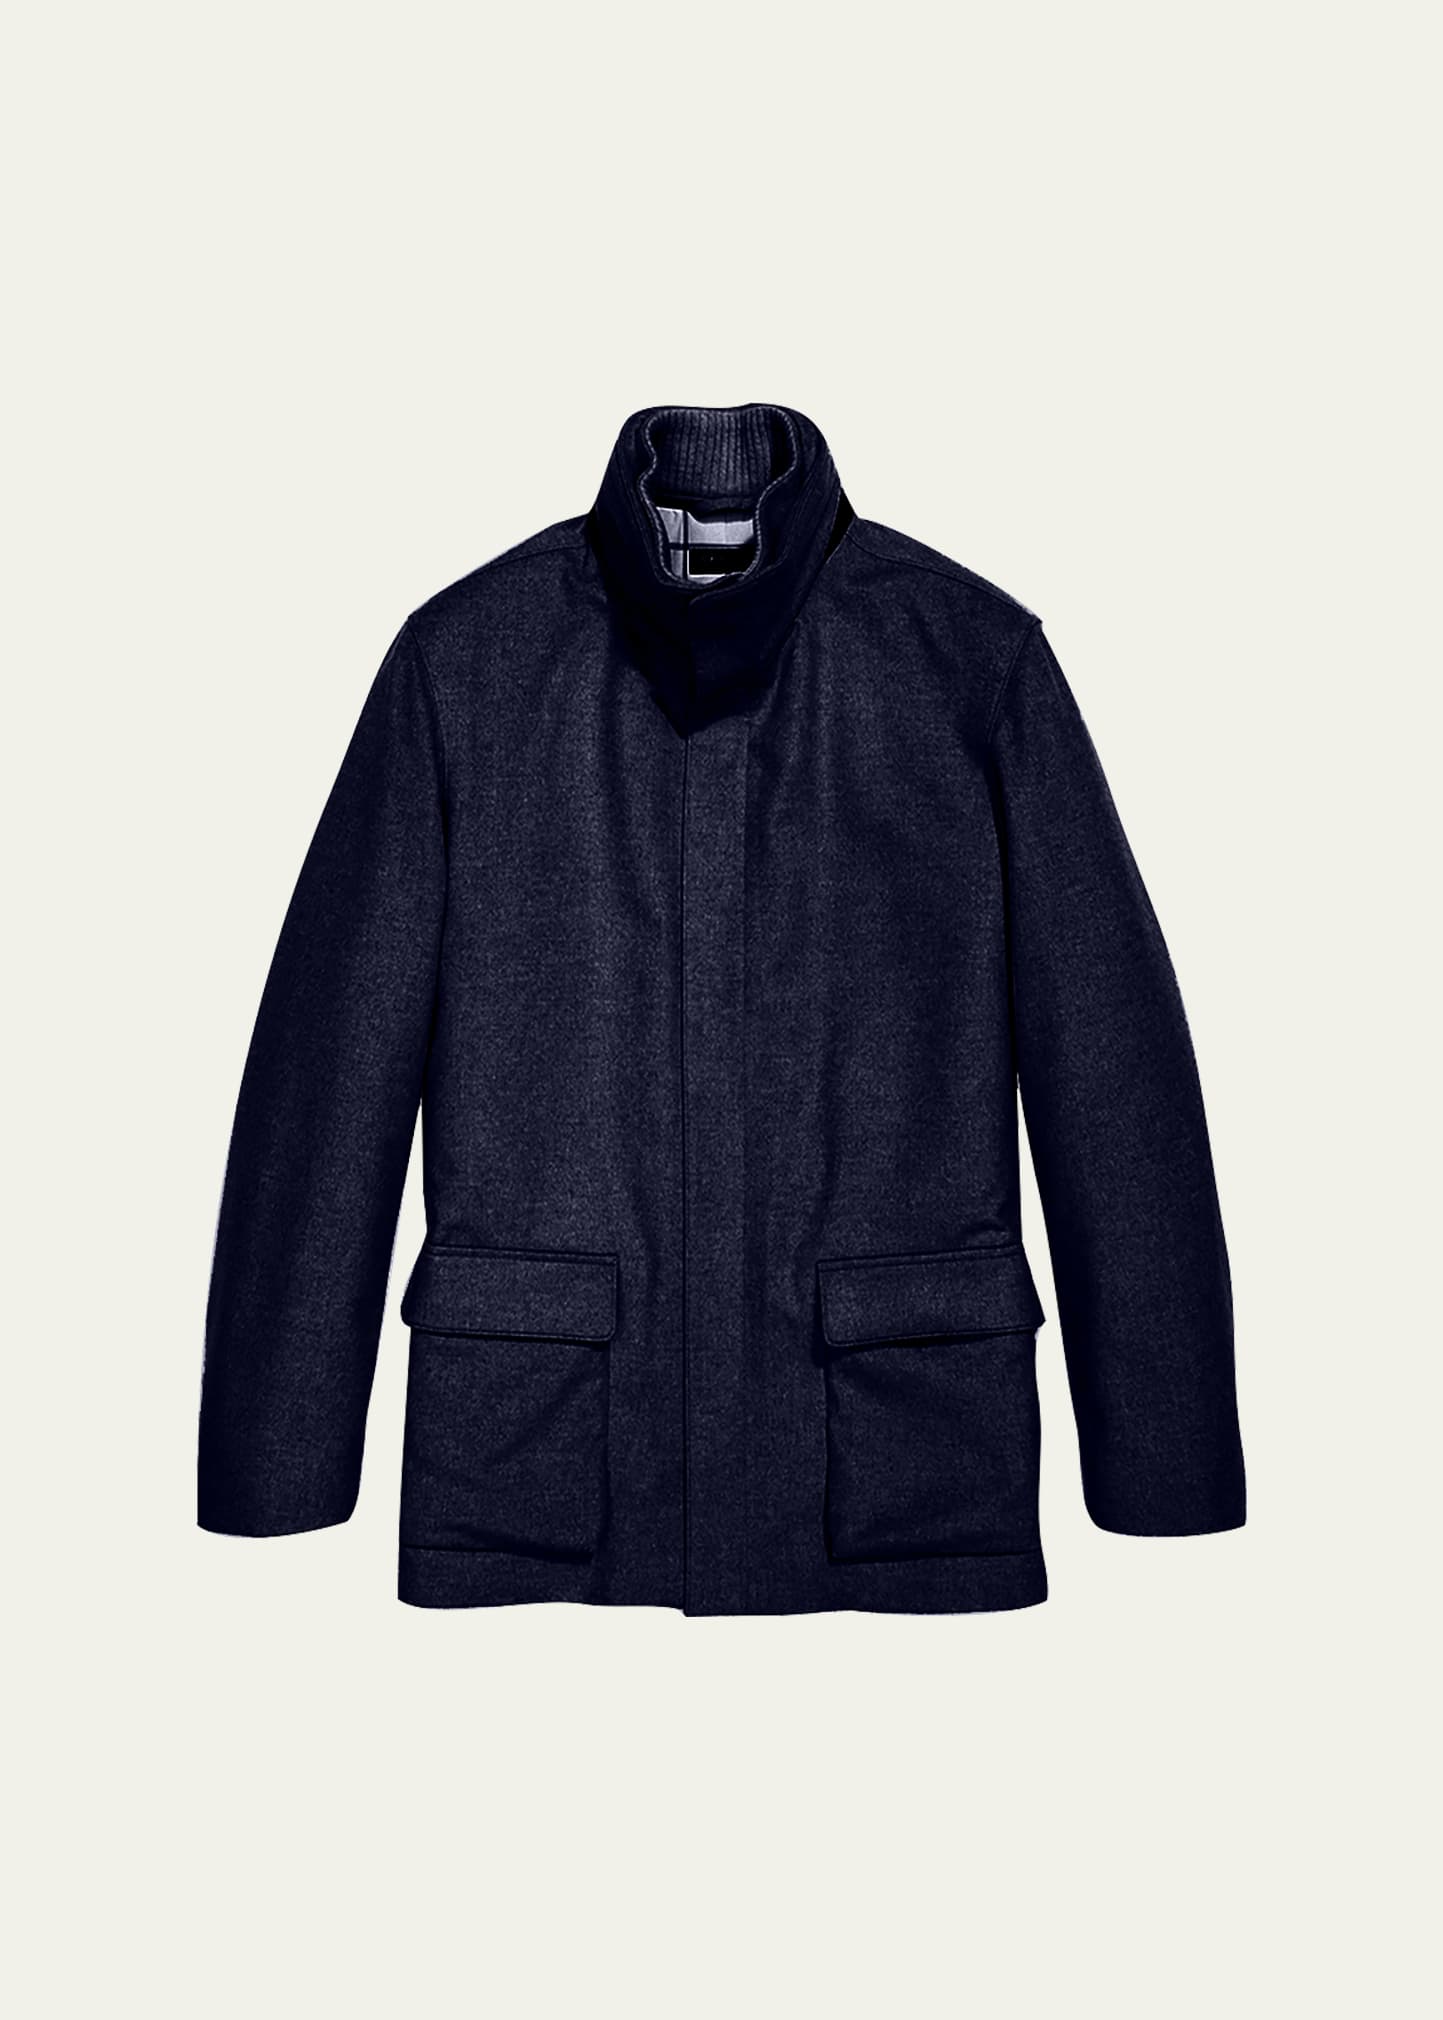 LORO PIANA WINTER VOYAGER CASHMERE STORM SYSTEM COAT